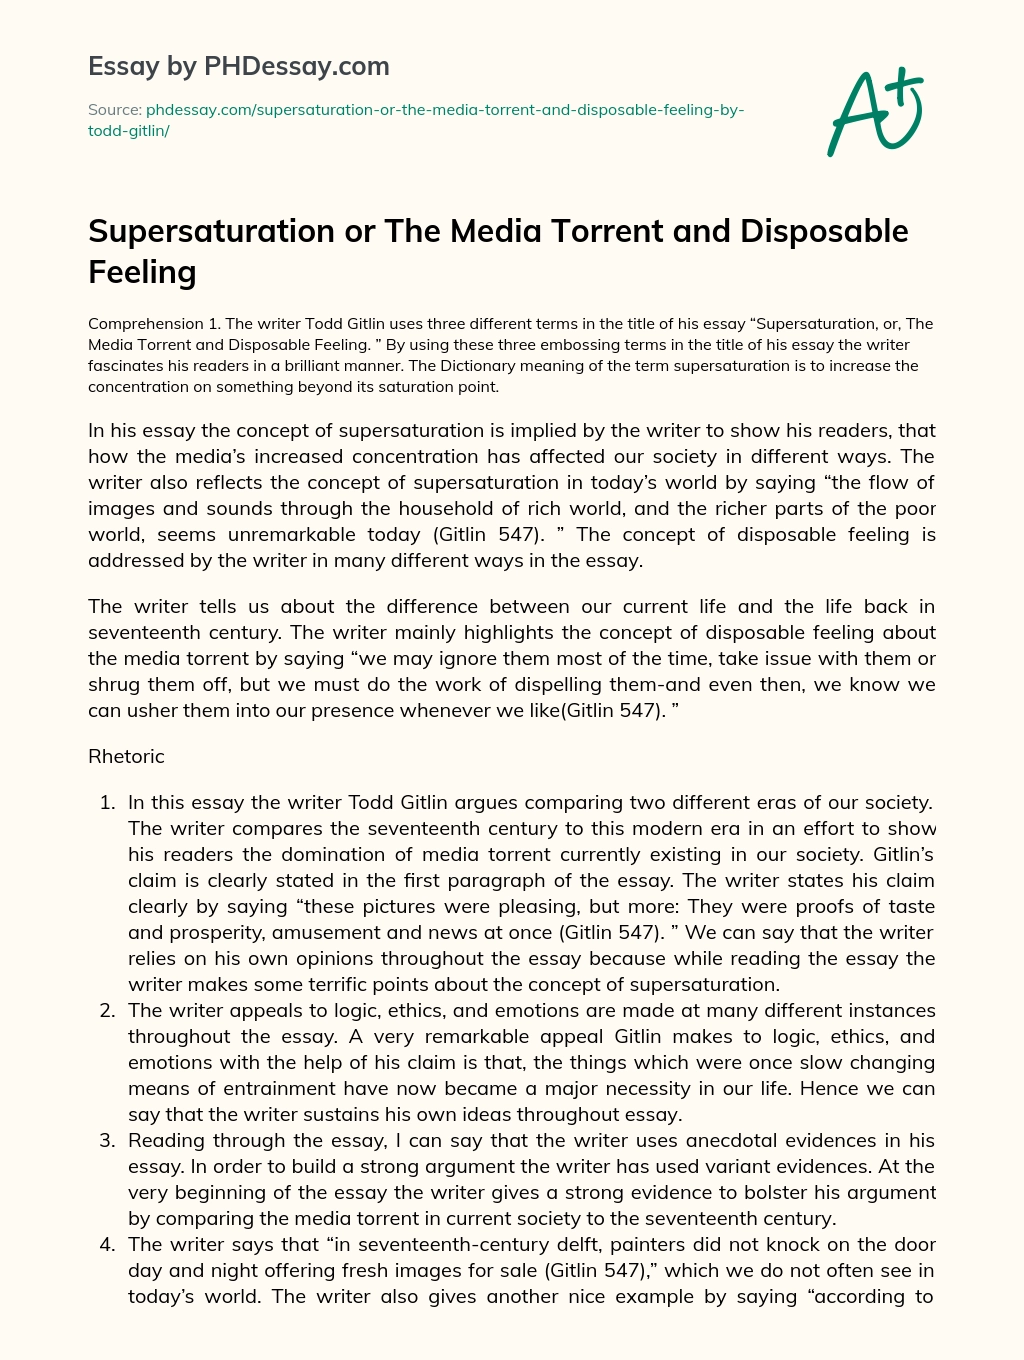 Supersaturation or The Media Torrent and Disposable Feeling essay